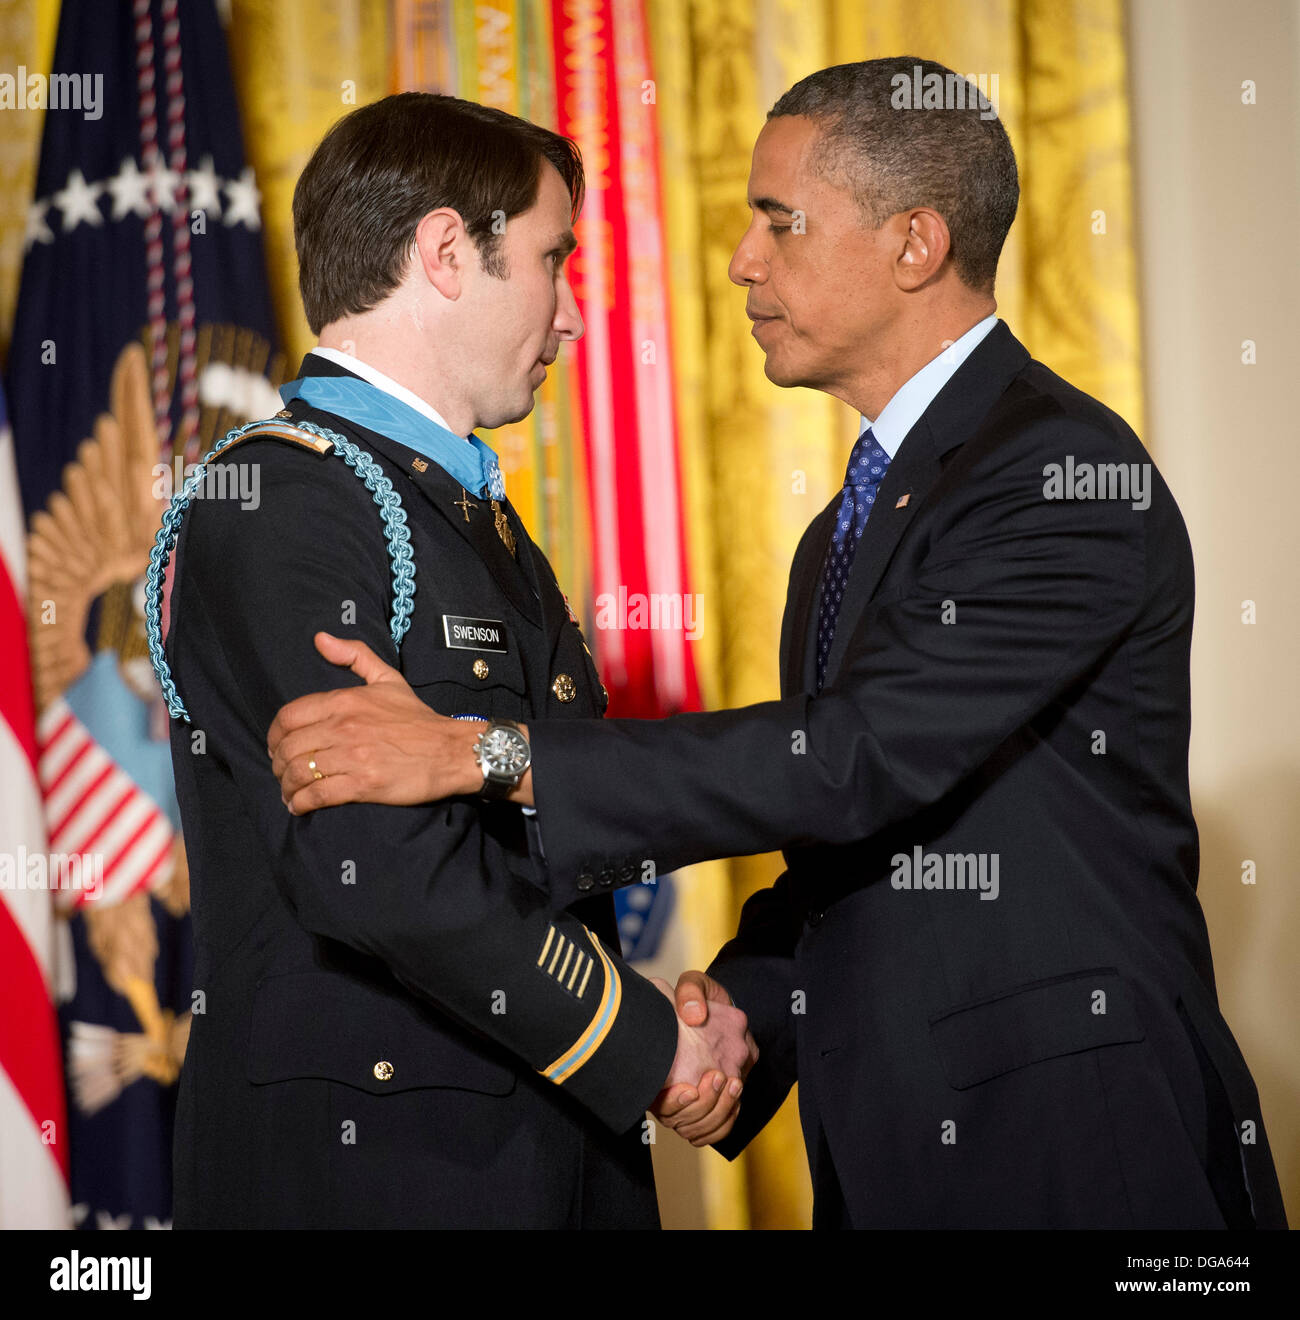 US President Barack Obama congratulates former Army Capt. William D. Swenson after presenting him with the Medal of Honor during a ceremony in the East Room of the White House October 15, 2013 in Washington, DC. The Medal of Honor is the nation's highest military honor. Stock Photo